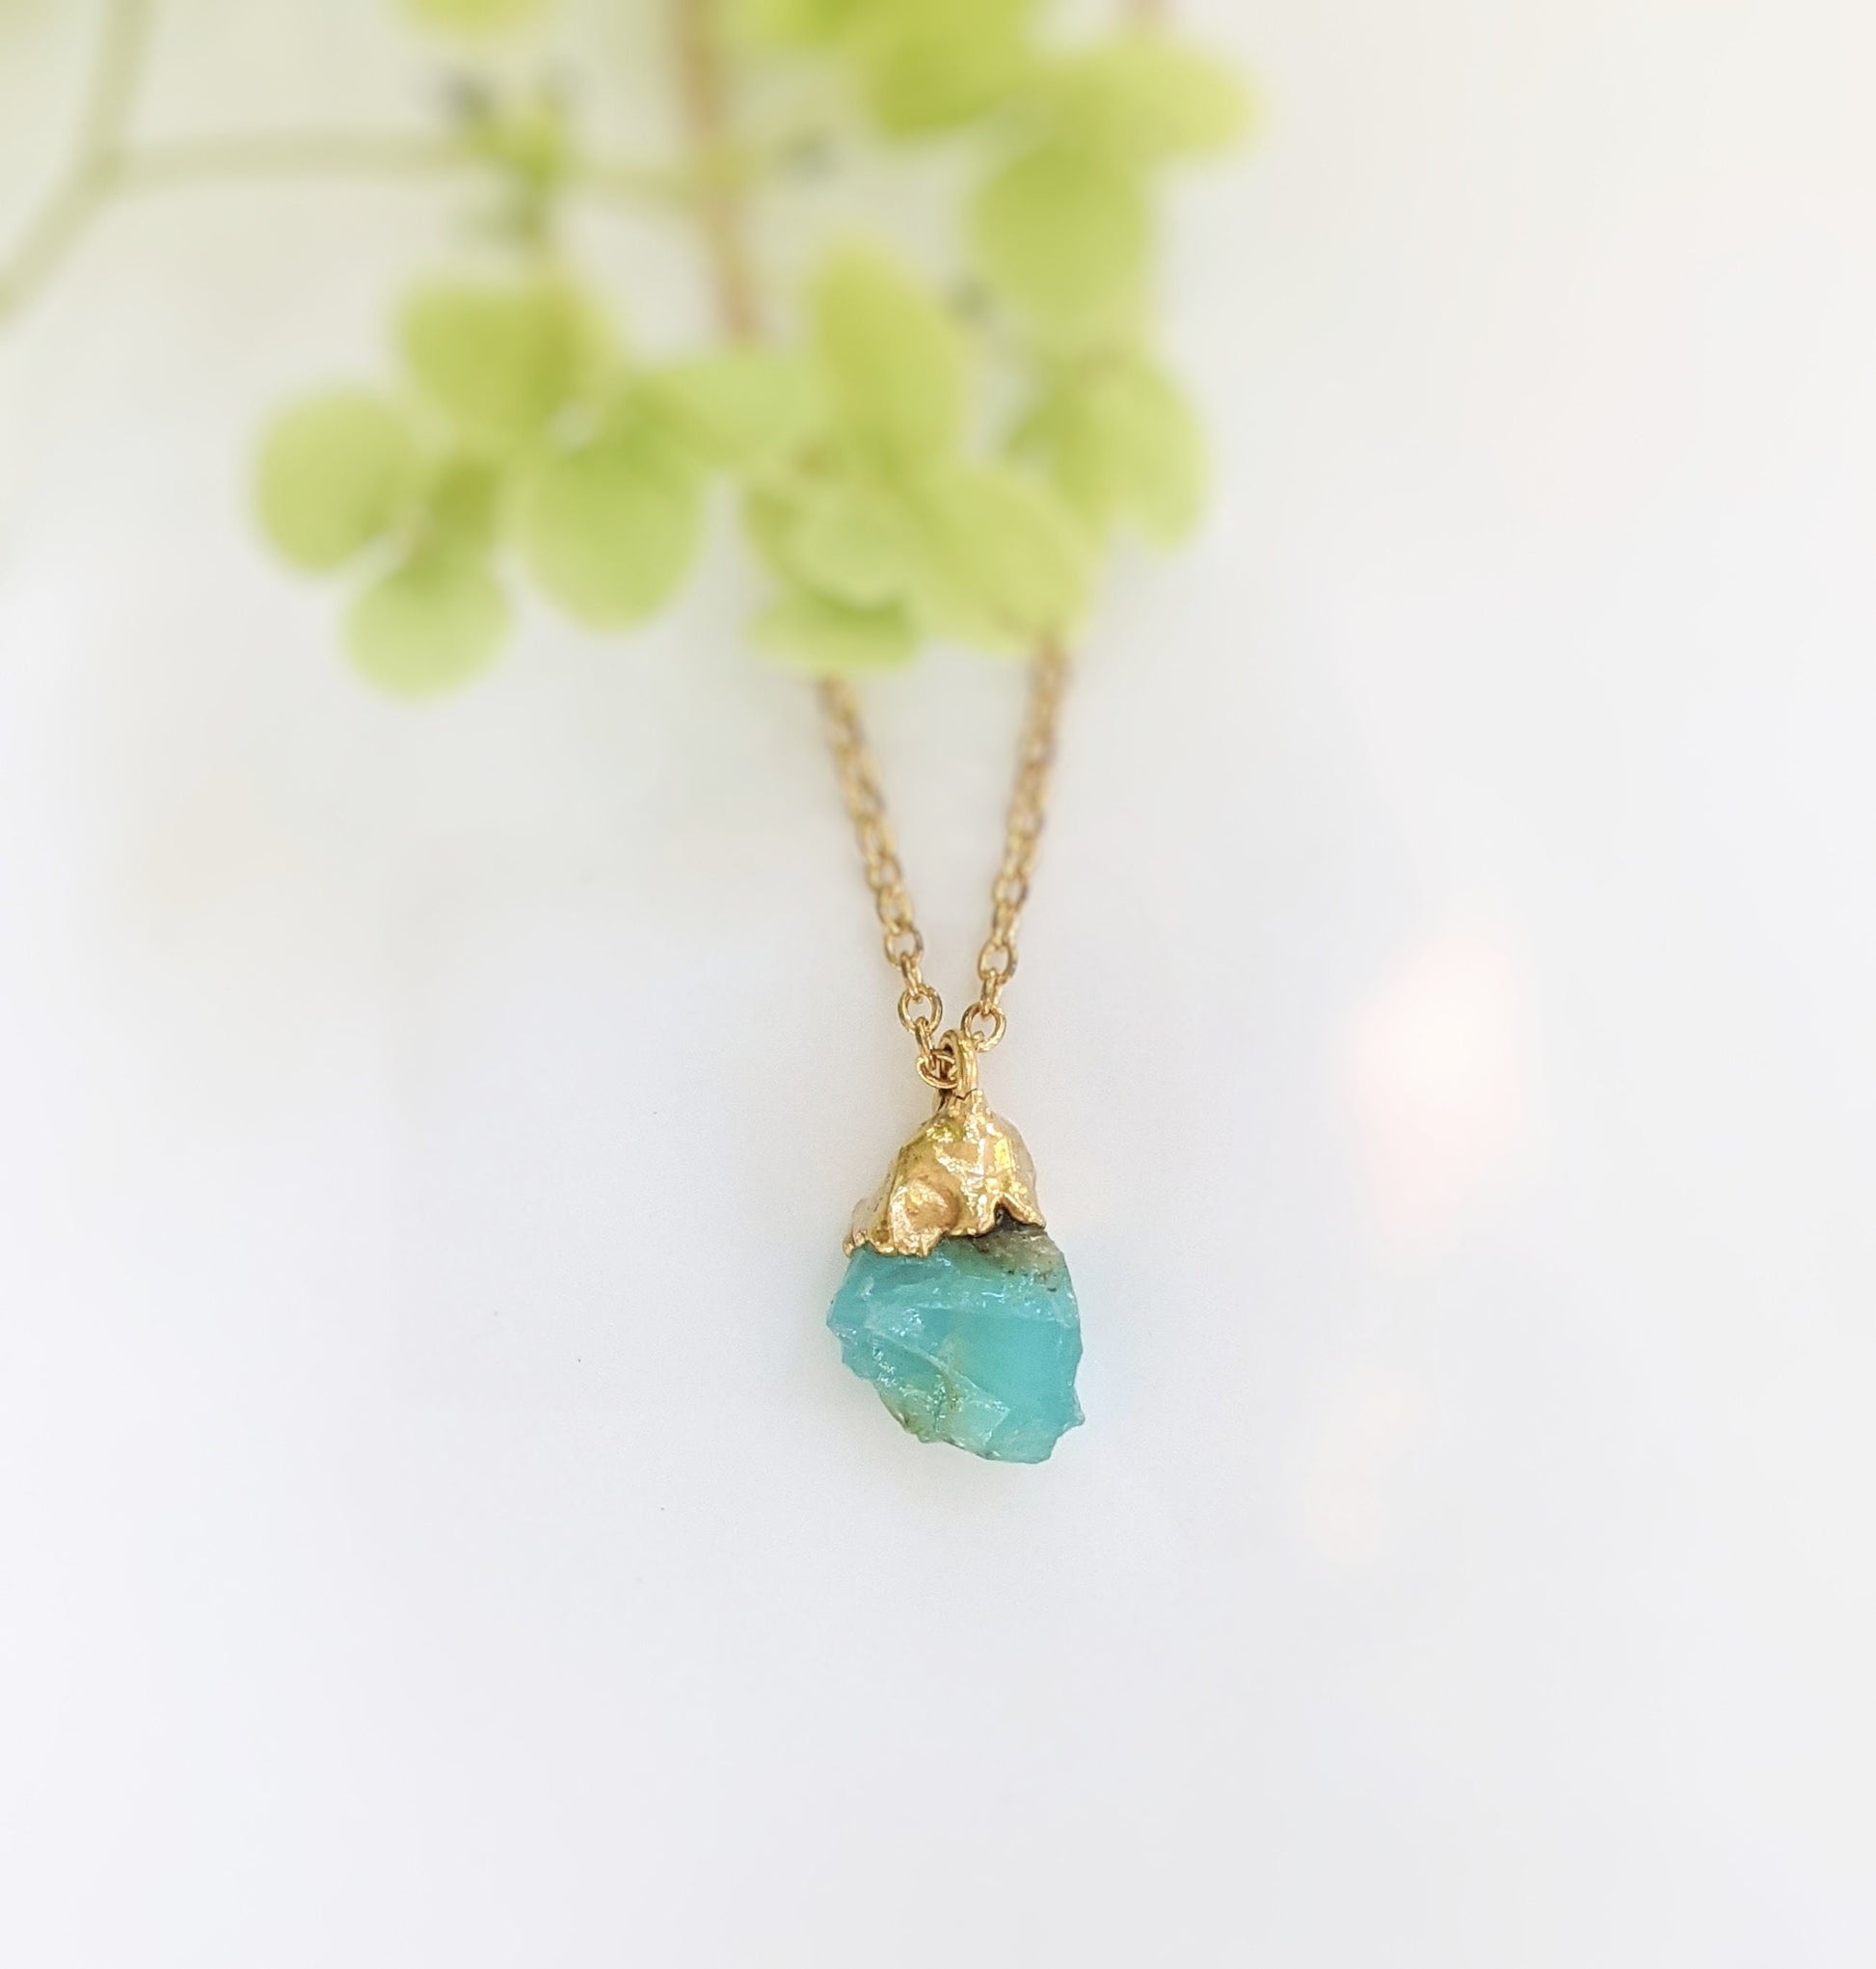 Raw Blue Peruvian Opal Necklace uniquely set in 18k Gold